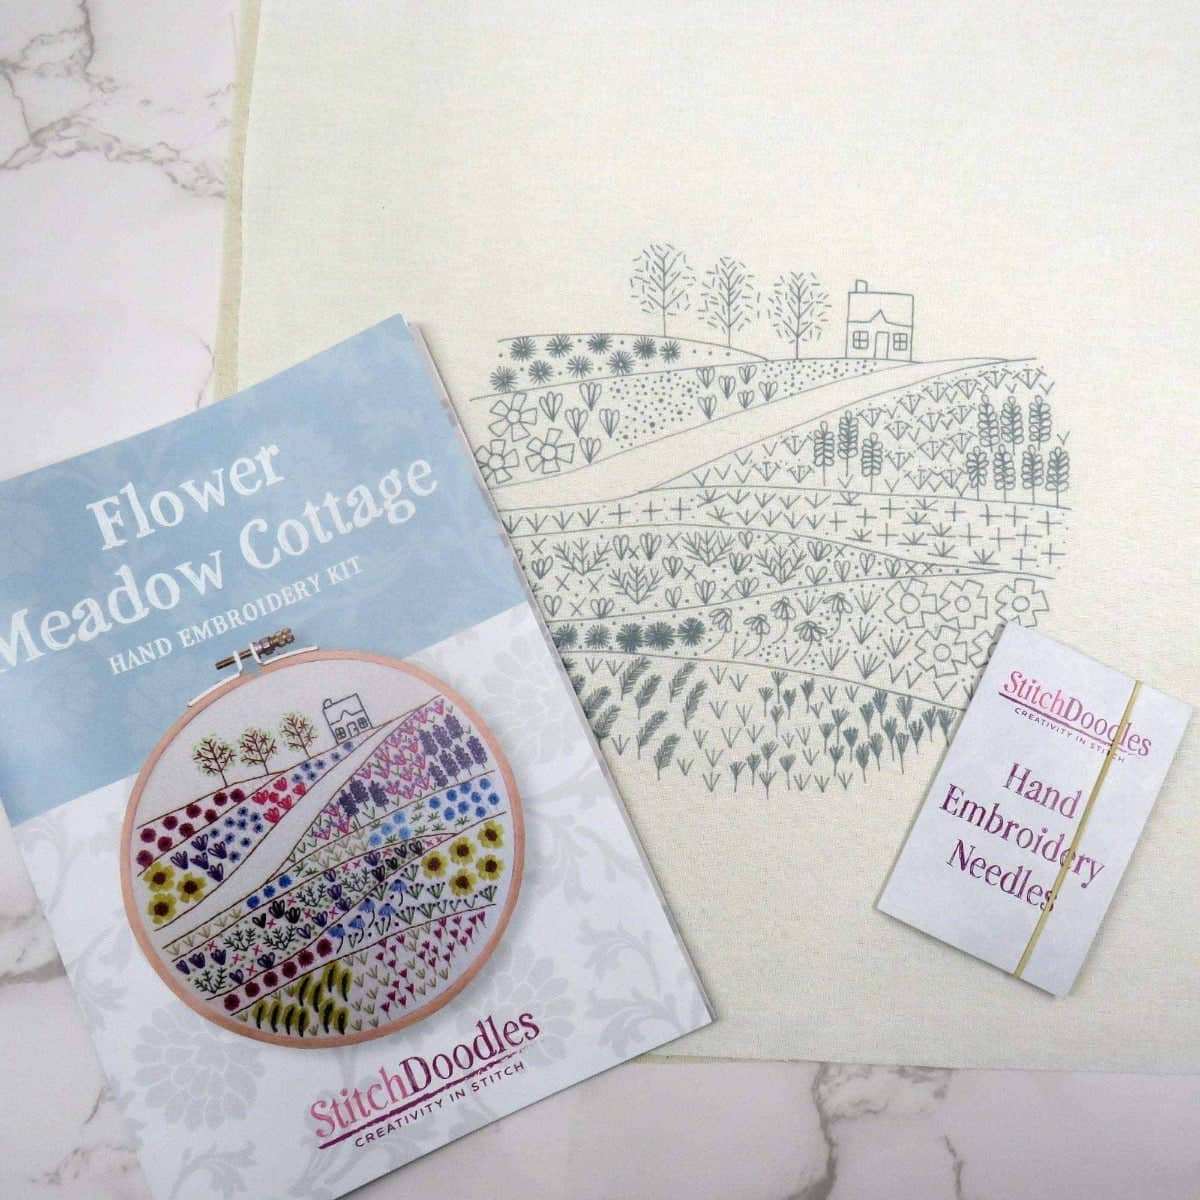 Flower Meadow Cottage Hand Embroidery Kit , Embroidery Kit , StitchDoodles , beginner embroidery, Embroidery, embroidery hoop kit, Embroidery Kit, embroidery kits for adults, embroidery kits for beginners, flower embroidery, hand embroidery, hand embroidery fabric, hand embroidery hoop, hand embroidery kit, hand embroidery pattern, hand embroidery thread, hand stitching, modern embroidery kits, nurge embroidery hoop, unique embroidery kits, wildlife embroidery , StitchDoodles , shop.stitchdoodles.com